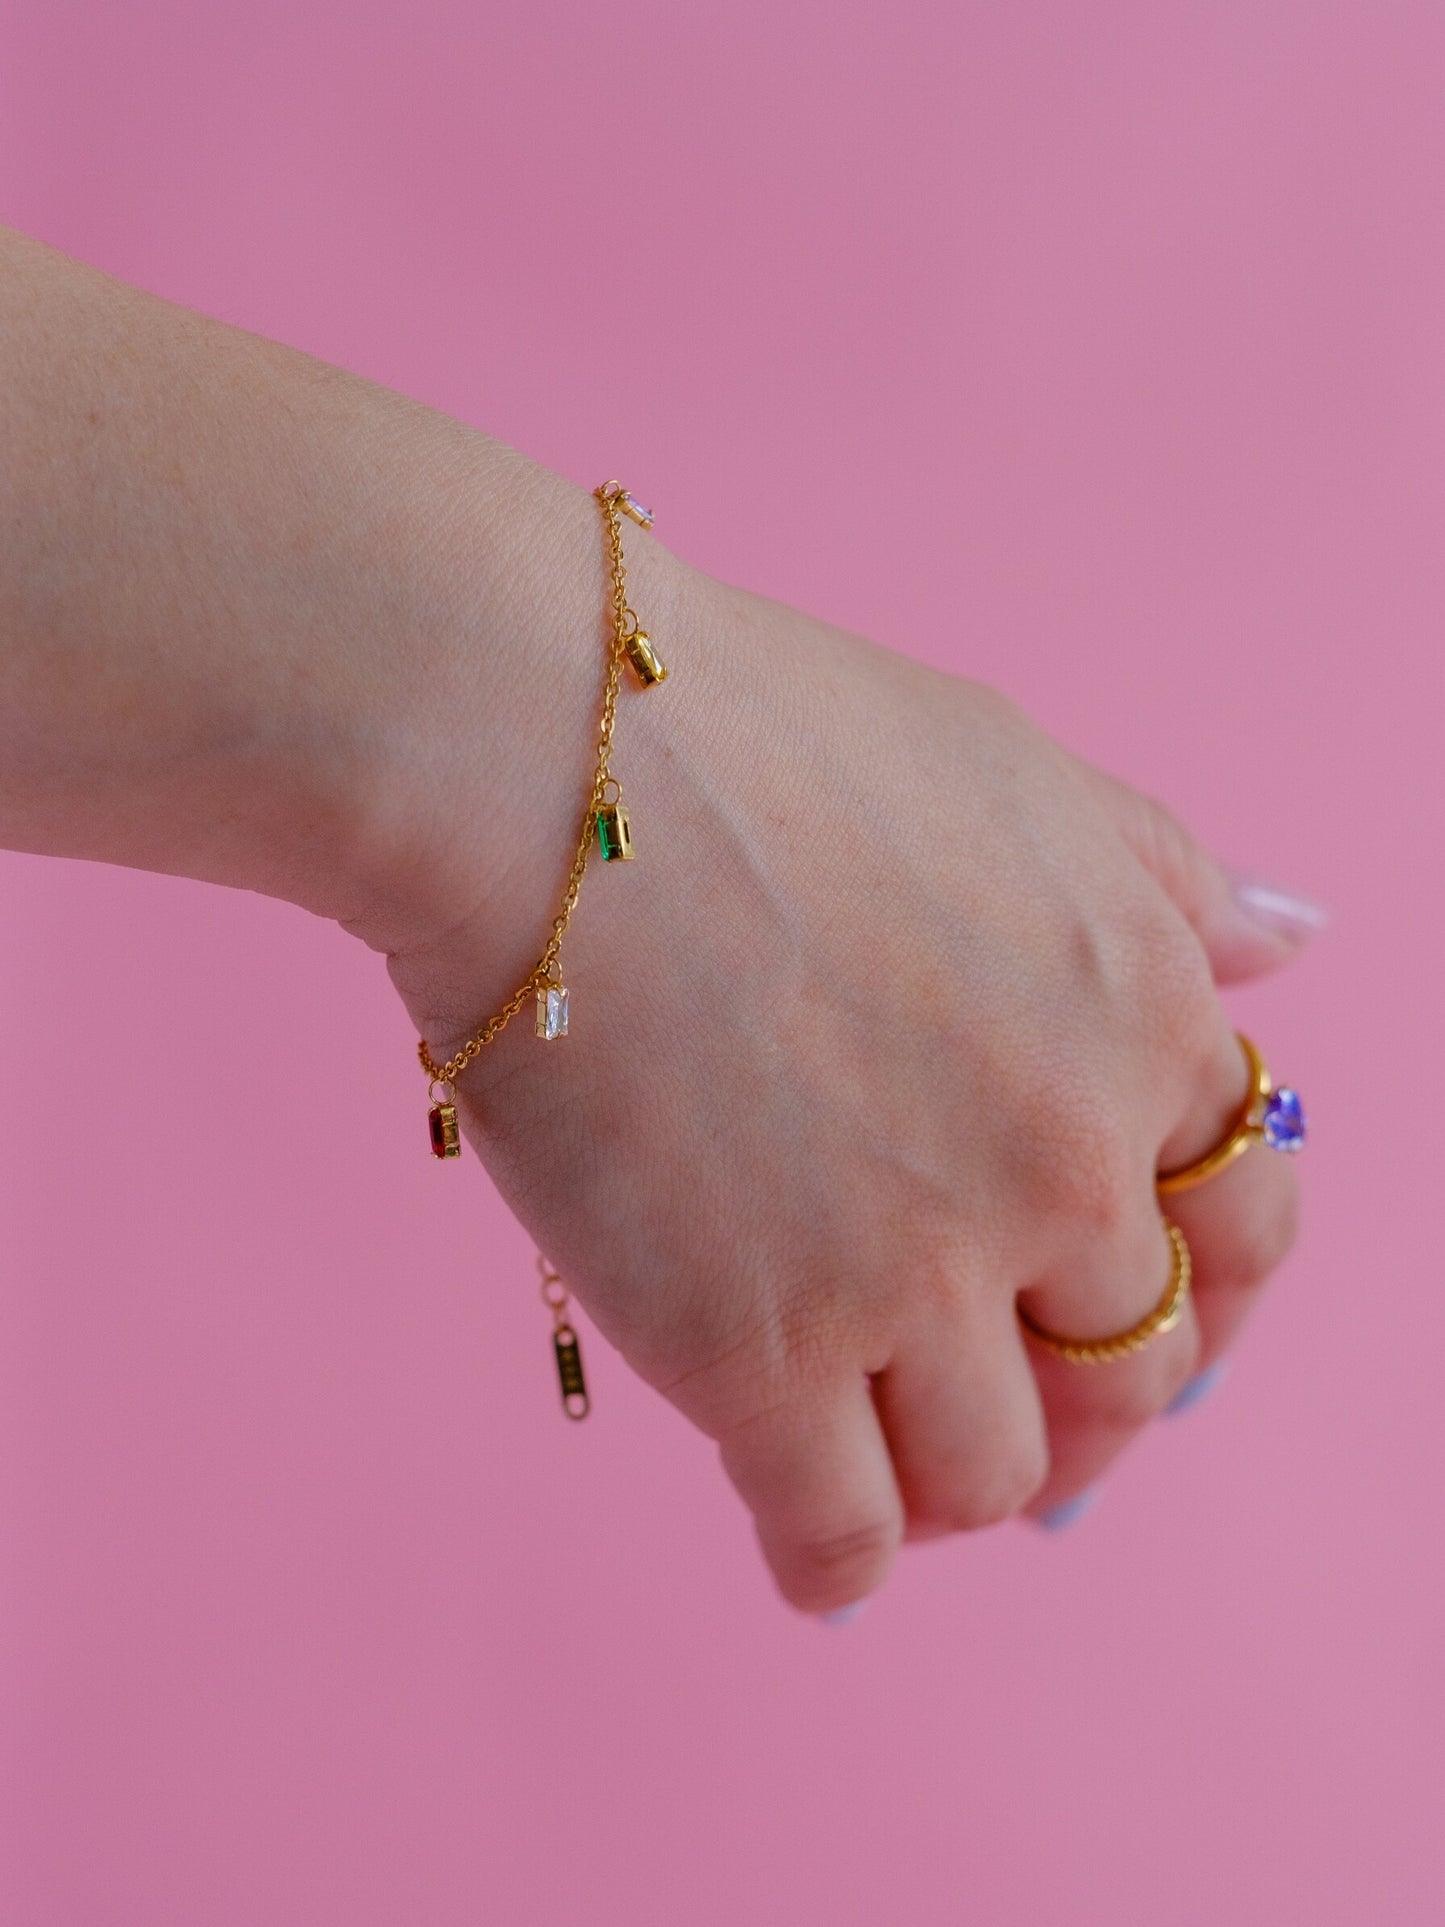 A woman wears a dainty gold bracelet with dangling gems in multiple colours